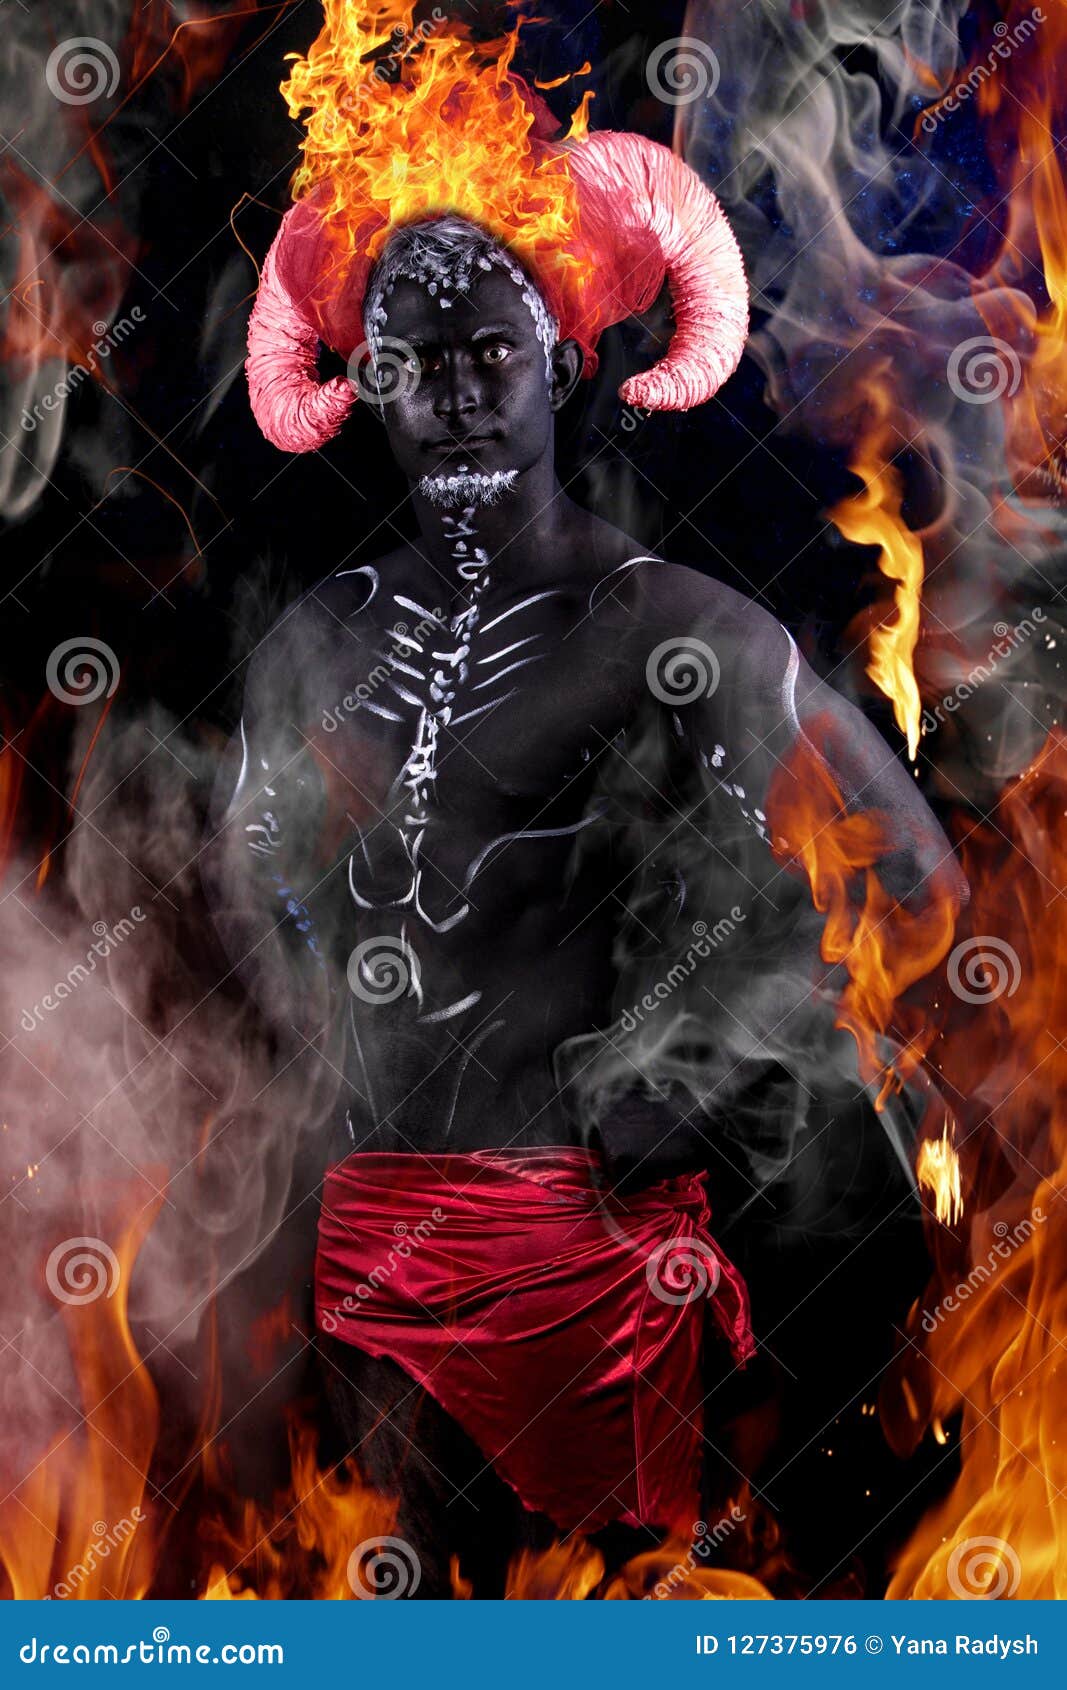 Fiery Demon. A Burning Demon With Horns And An Apple Of Discord